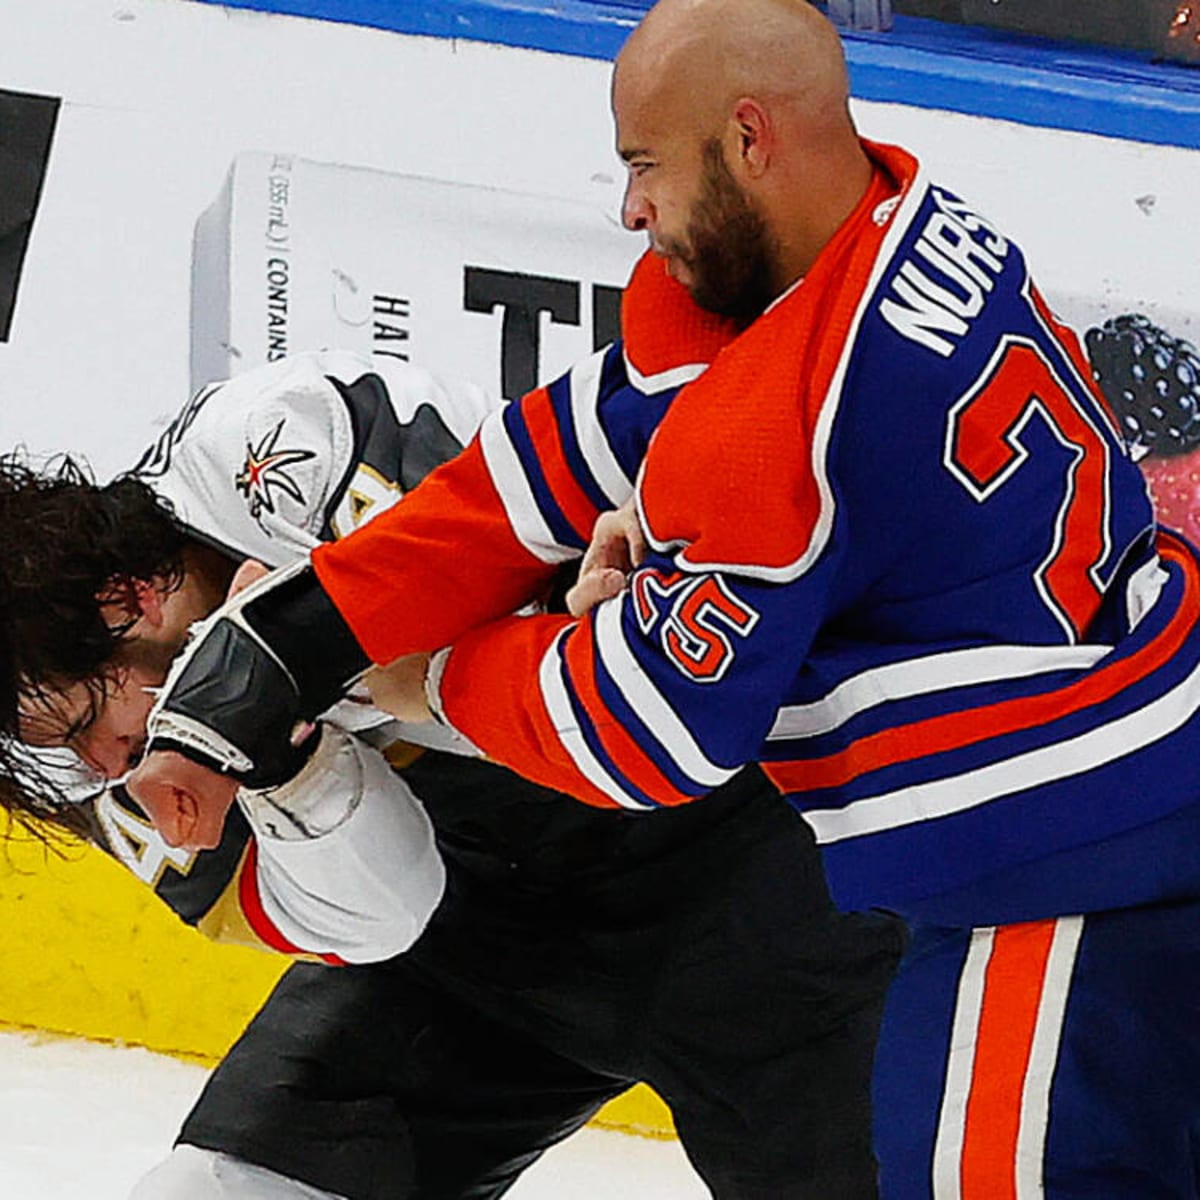 Oilers' Nurse Suspended, Coach Fined for Late Instigator Penalty